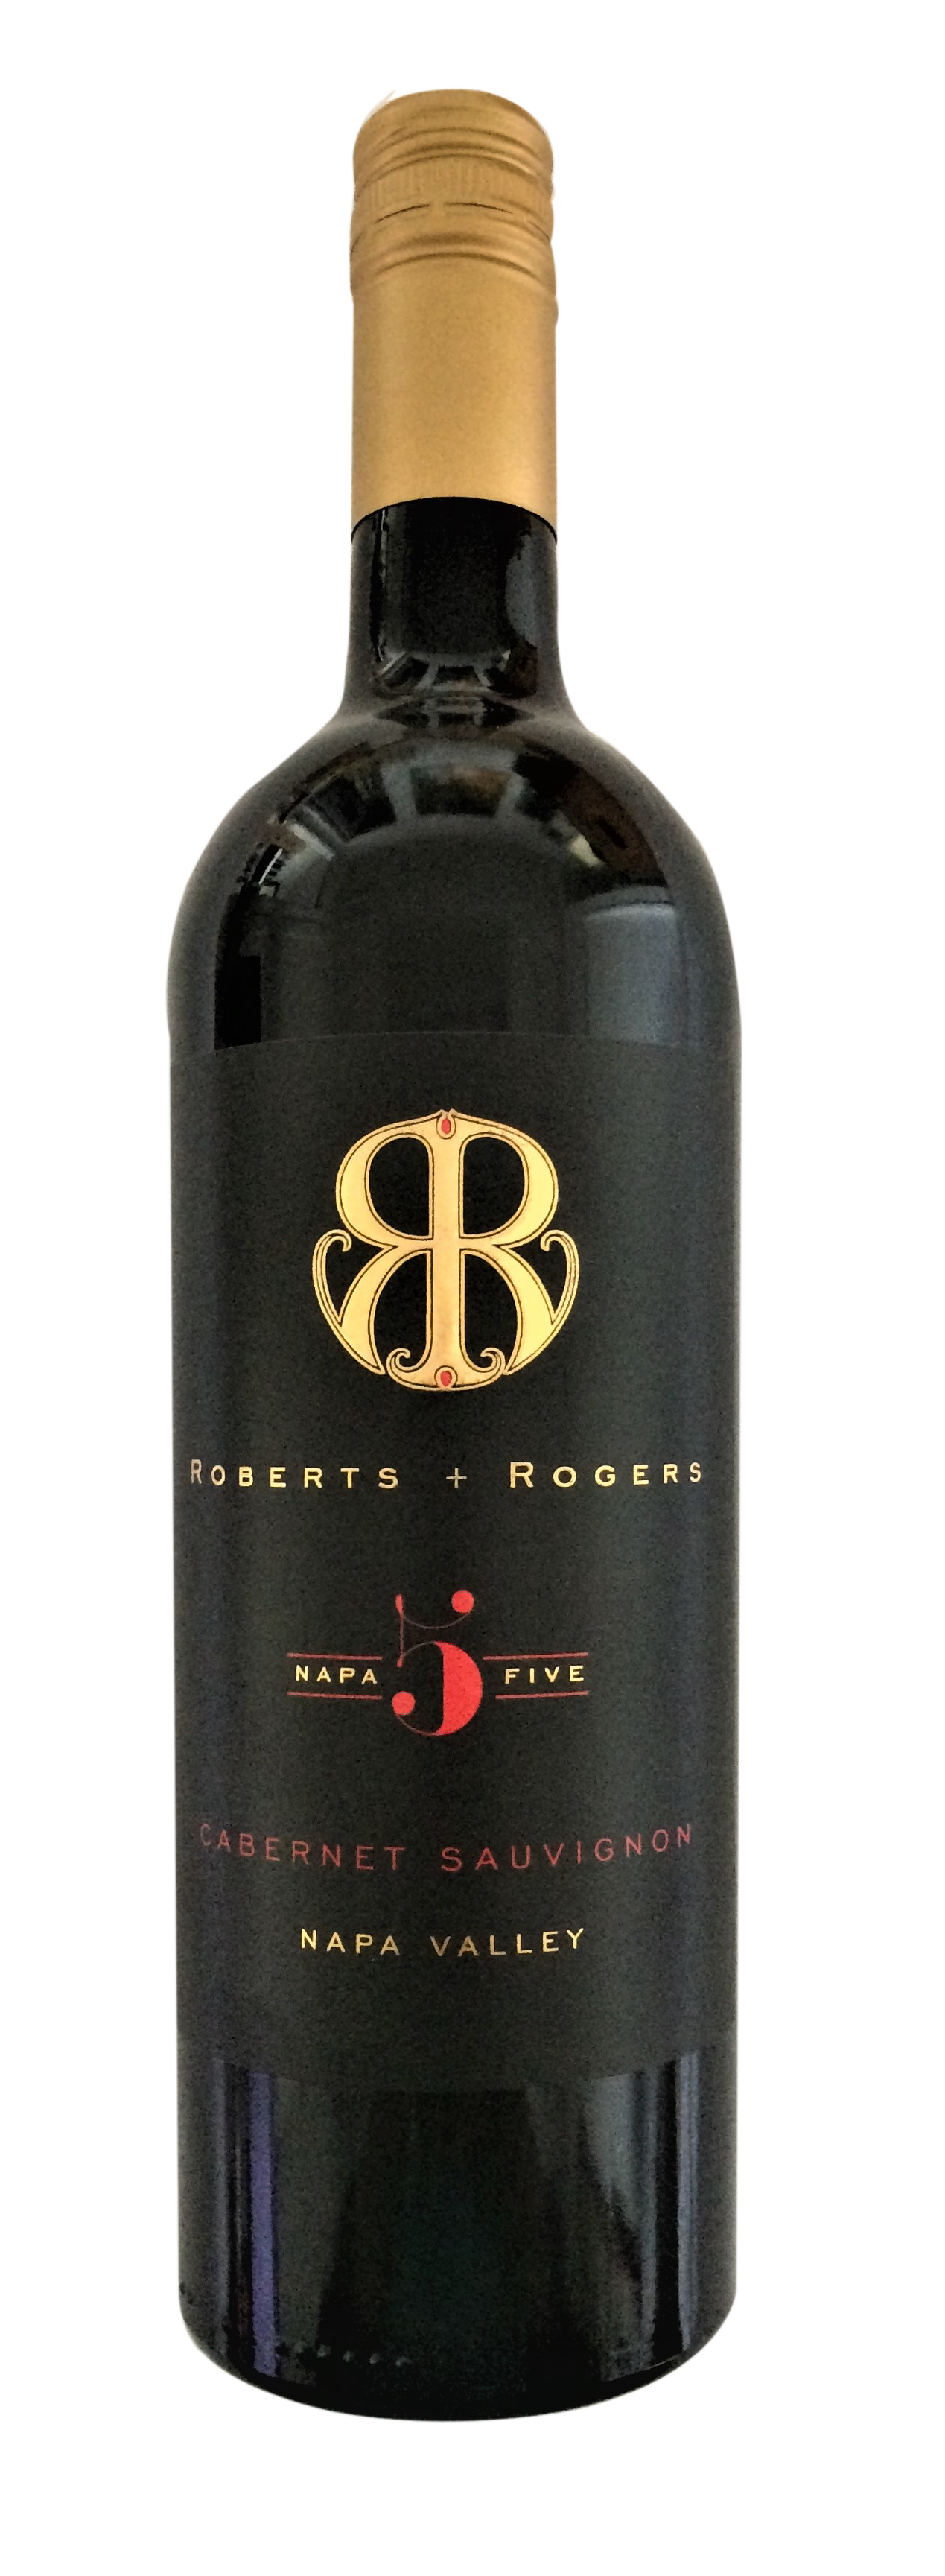 Product Image for Napa 5 Non Vintage Napa Valley Cabernet